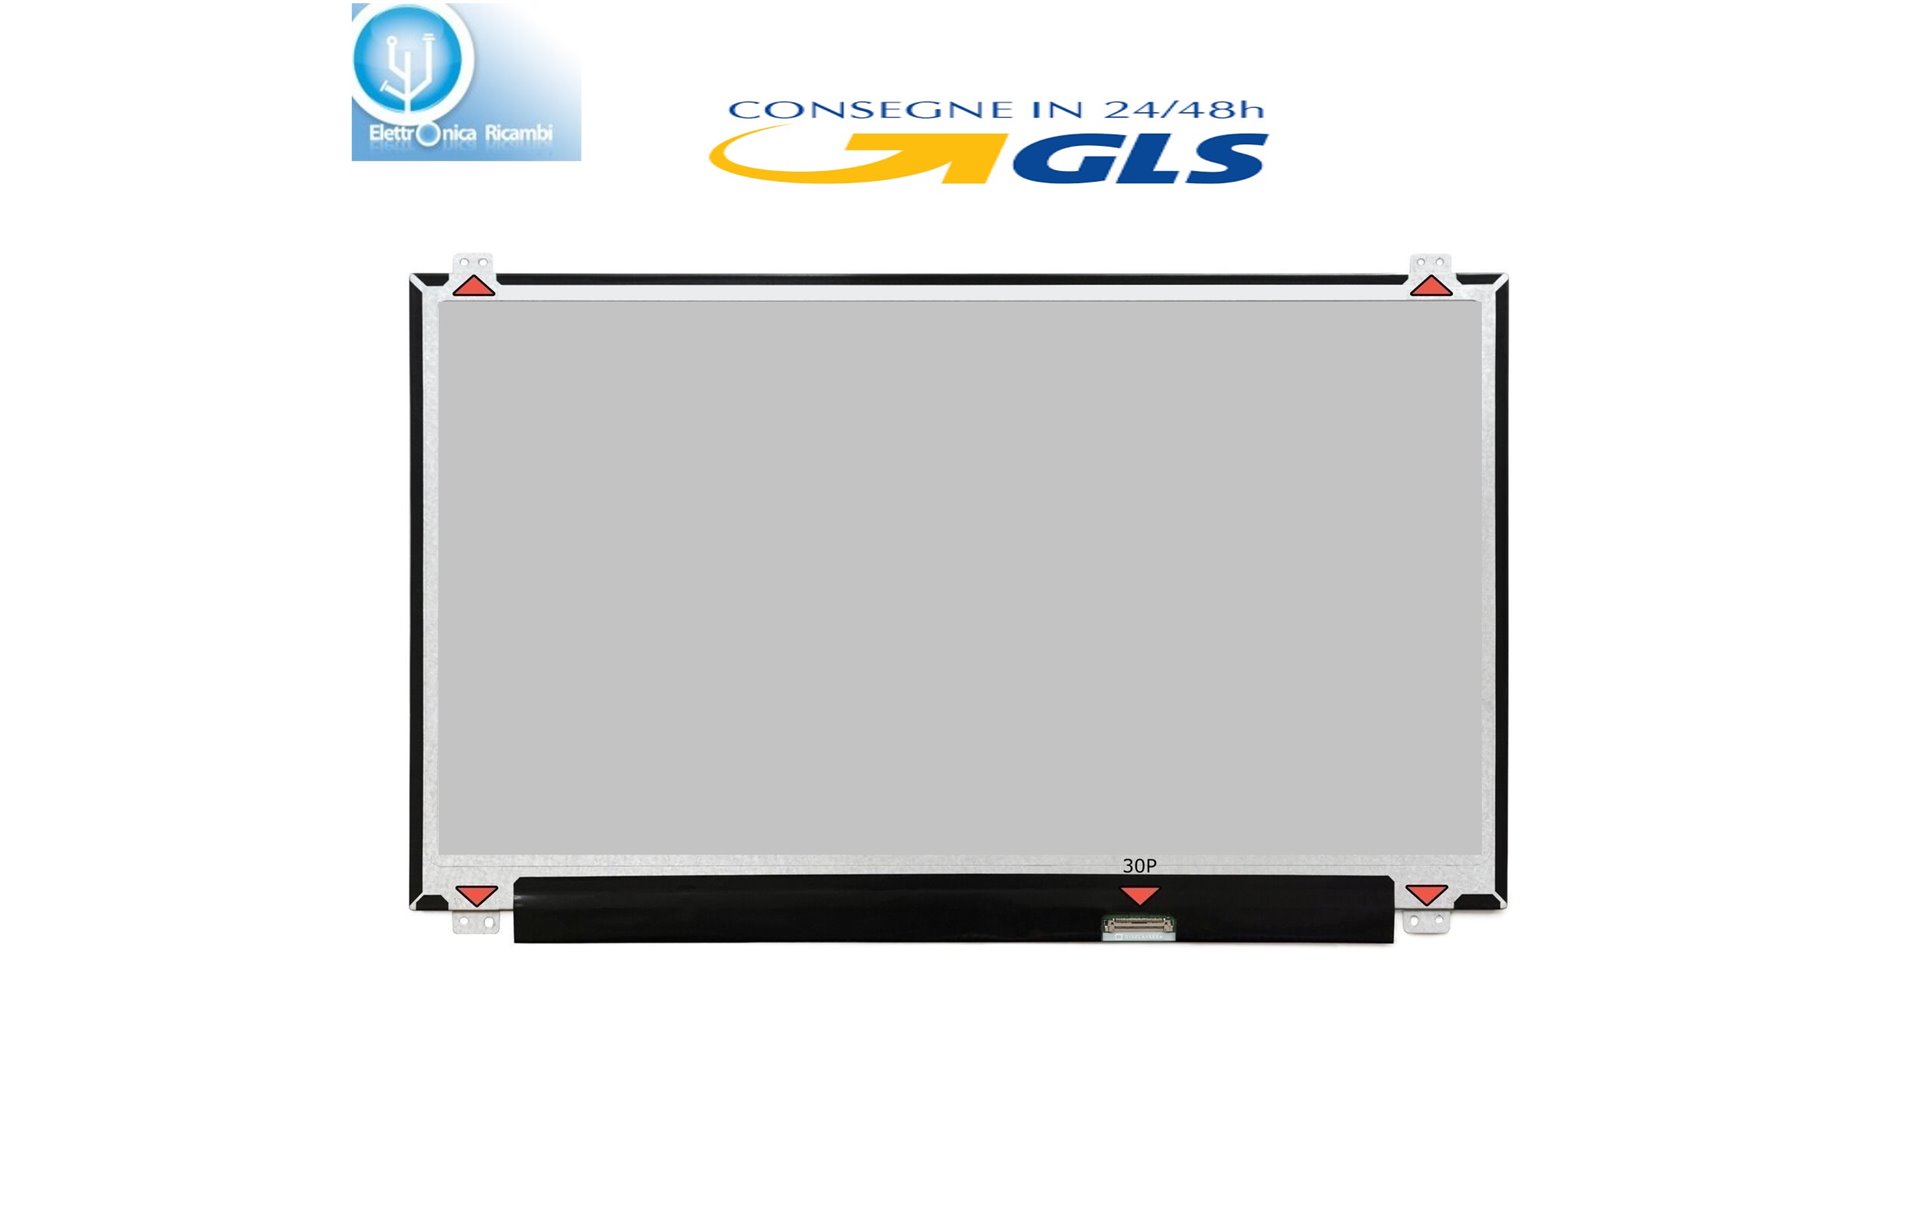 Display LCD PACKARD BELL EASYNOTE ENTE69HW 15,6 LED 1366X768 30 PIN